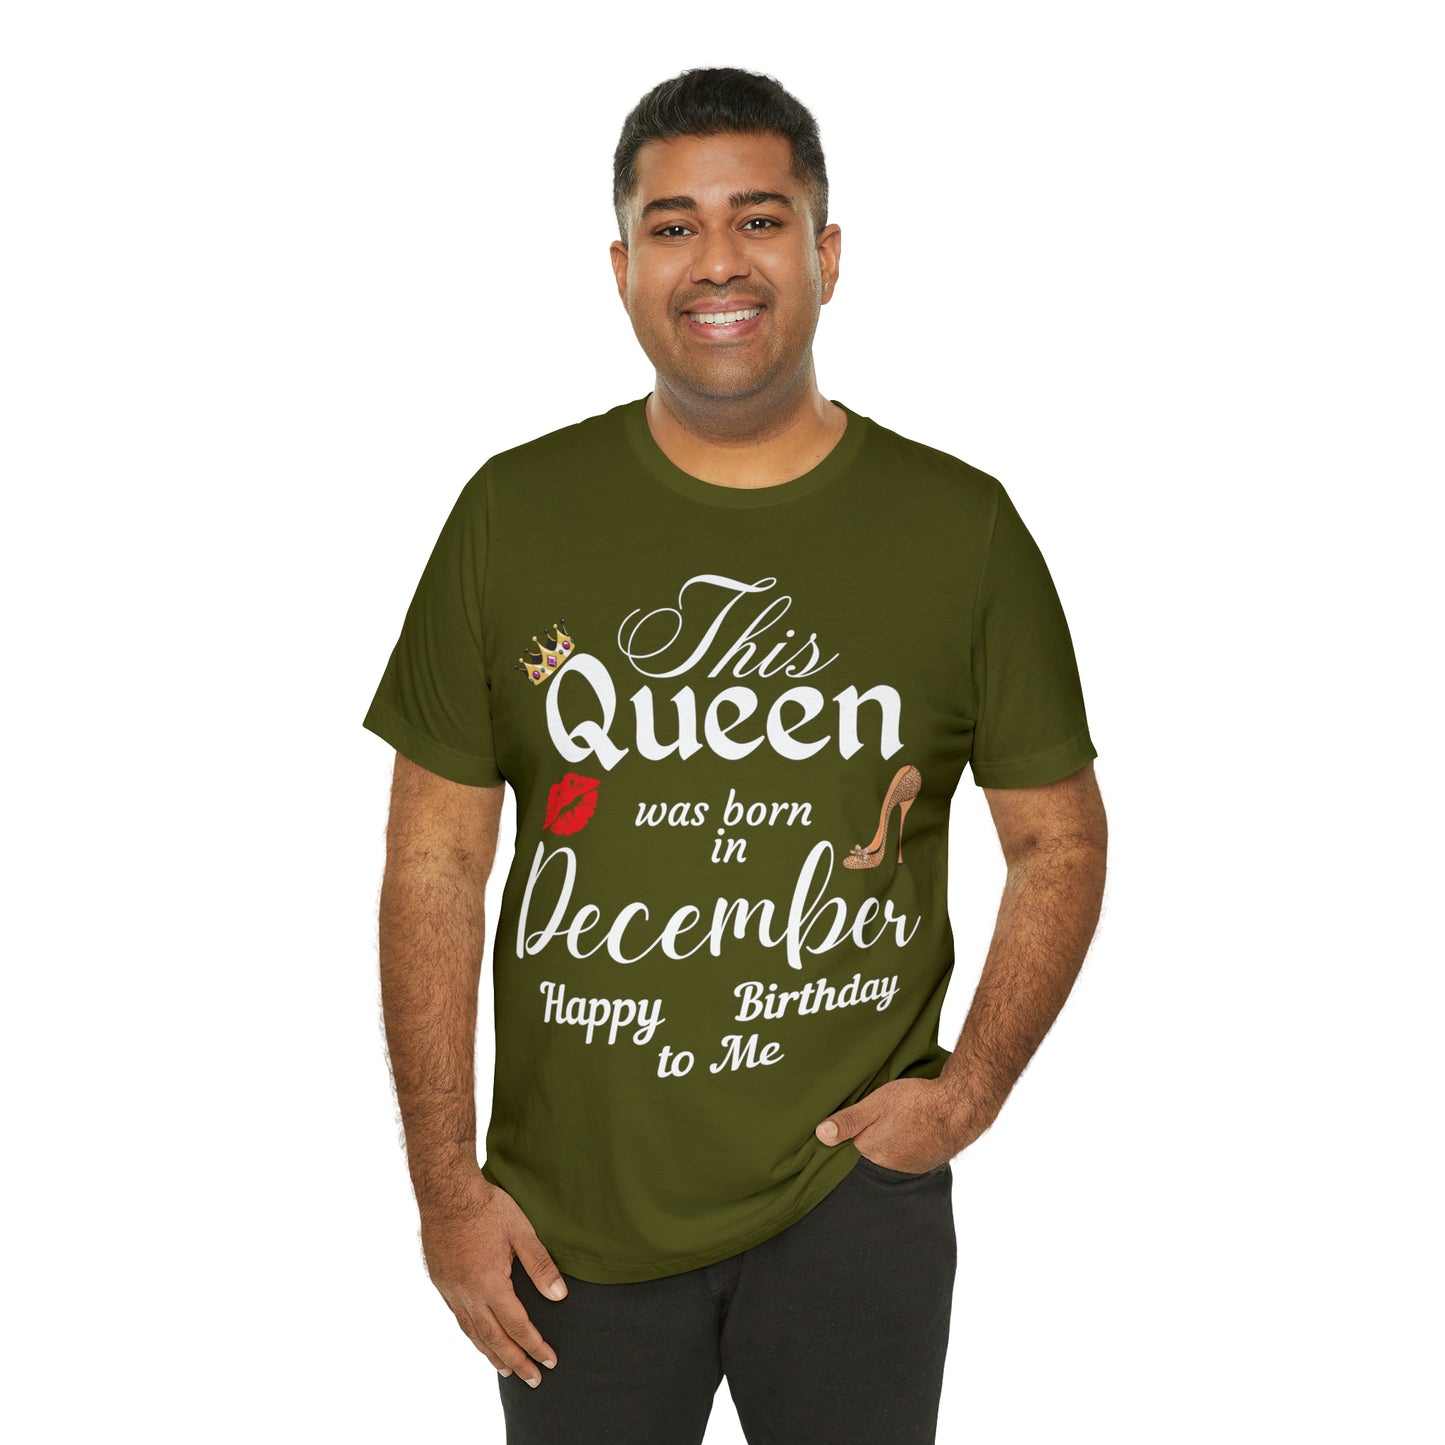 Birthday Queen Shirt, Gift for Birthday, This Queen was born in December Shirt, Funny Queen Shirt, Funny Birthday Shirt, Birthday Gift